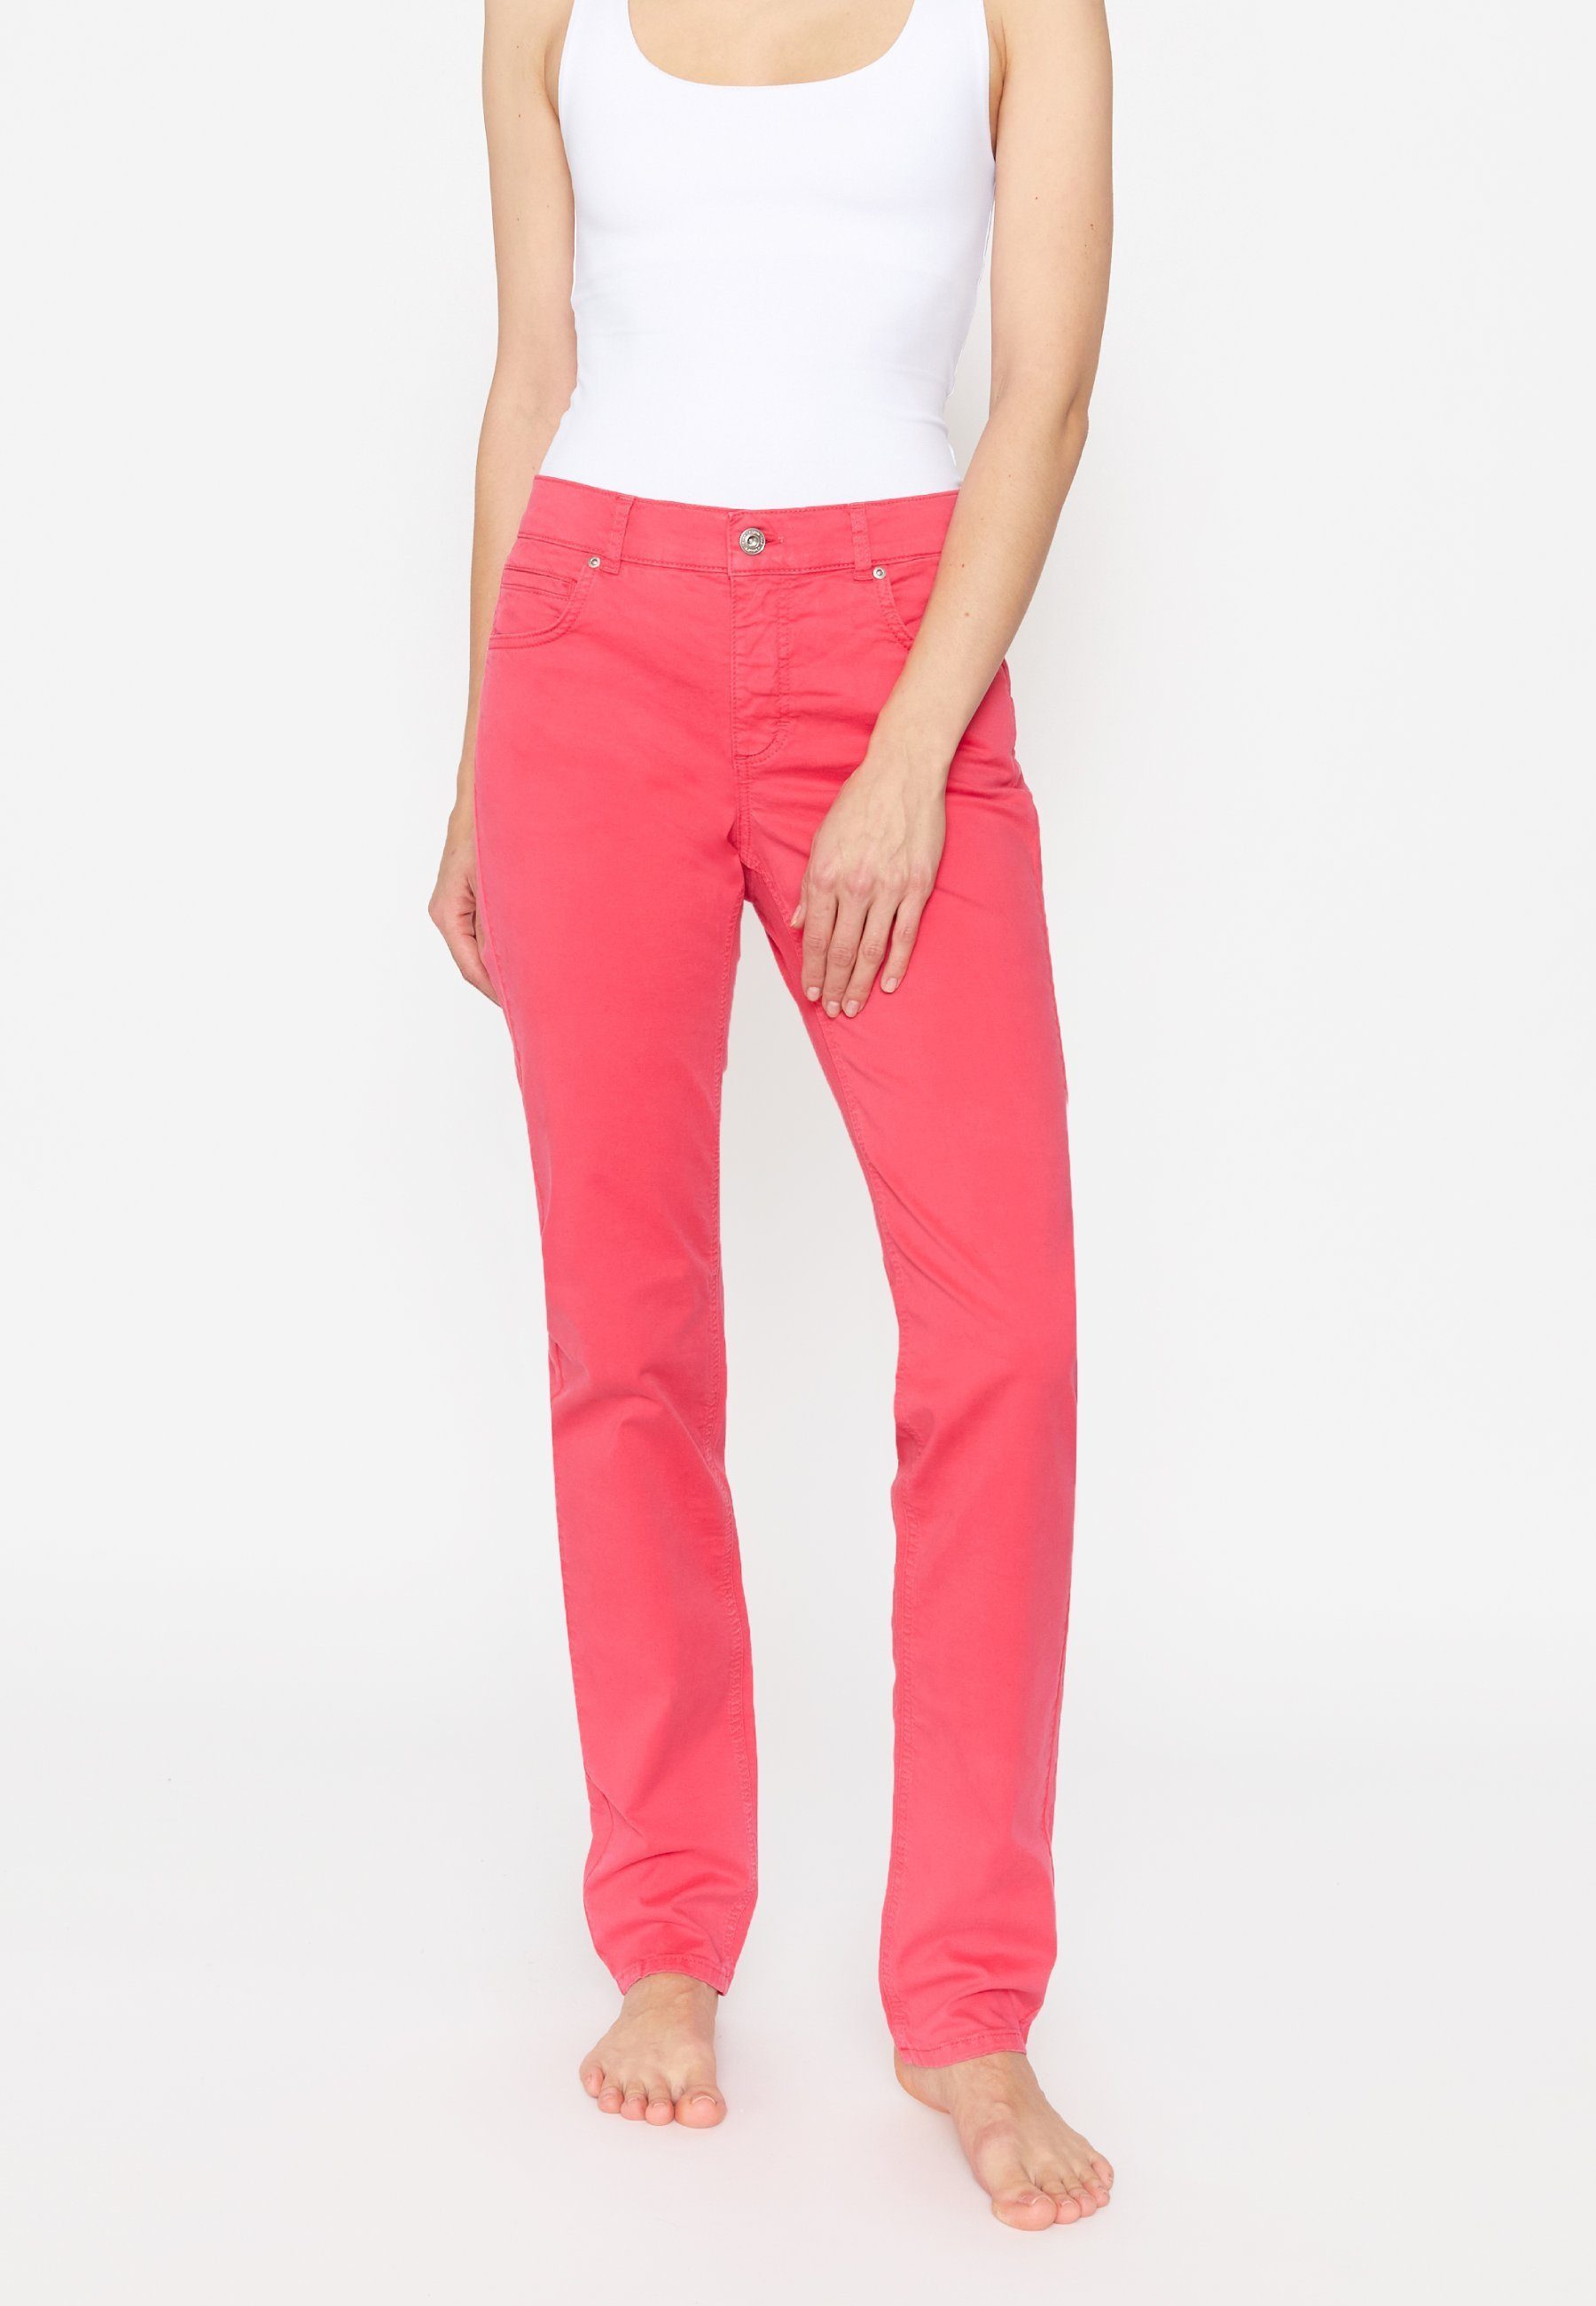 ANGELS Straight-Jeans Jeans Cici Ton-in-Ton-Nähte pink Denim Coloured mit